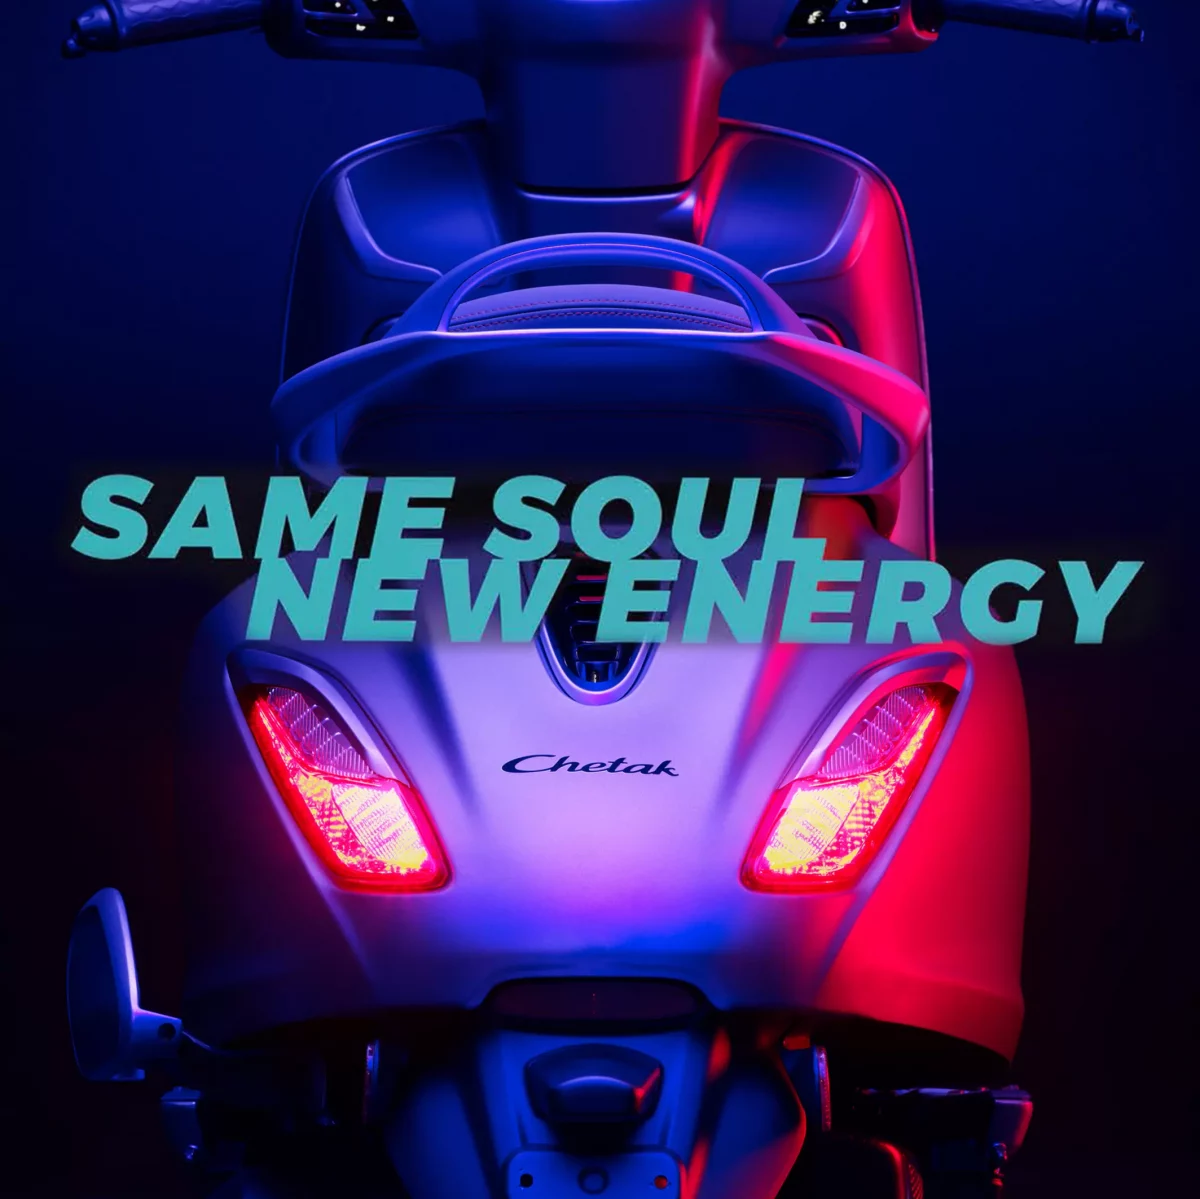 Same Soul New Energy - Chetak - Backside view of scooter